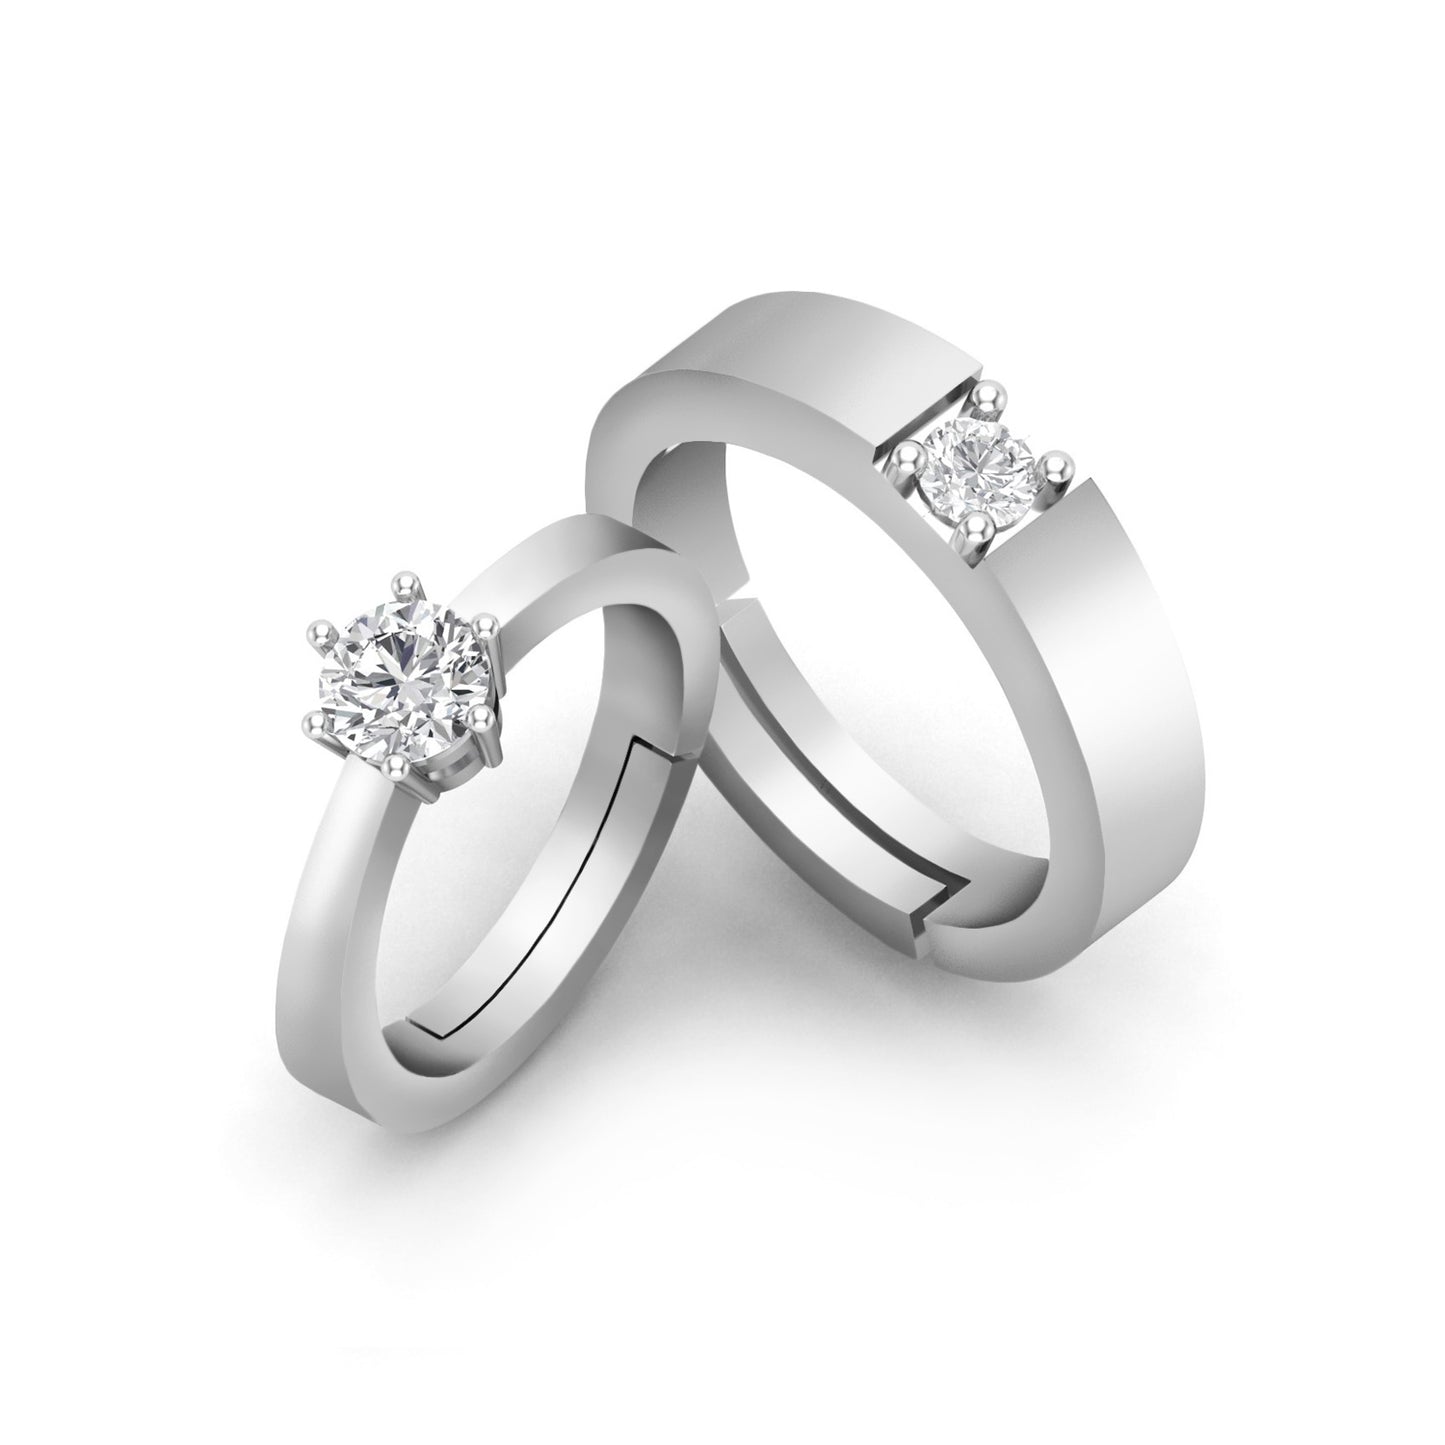 Ross & Rachel Couple Solitaire Ring - 925 Silver